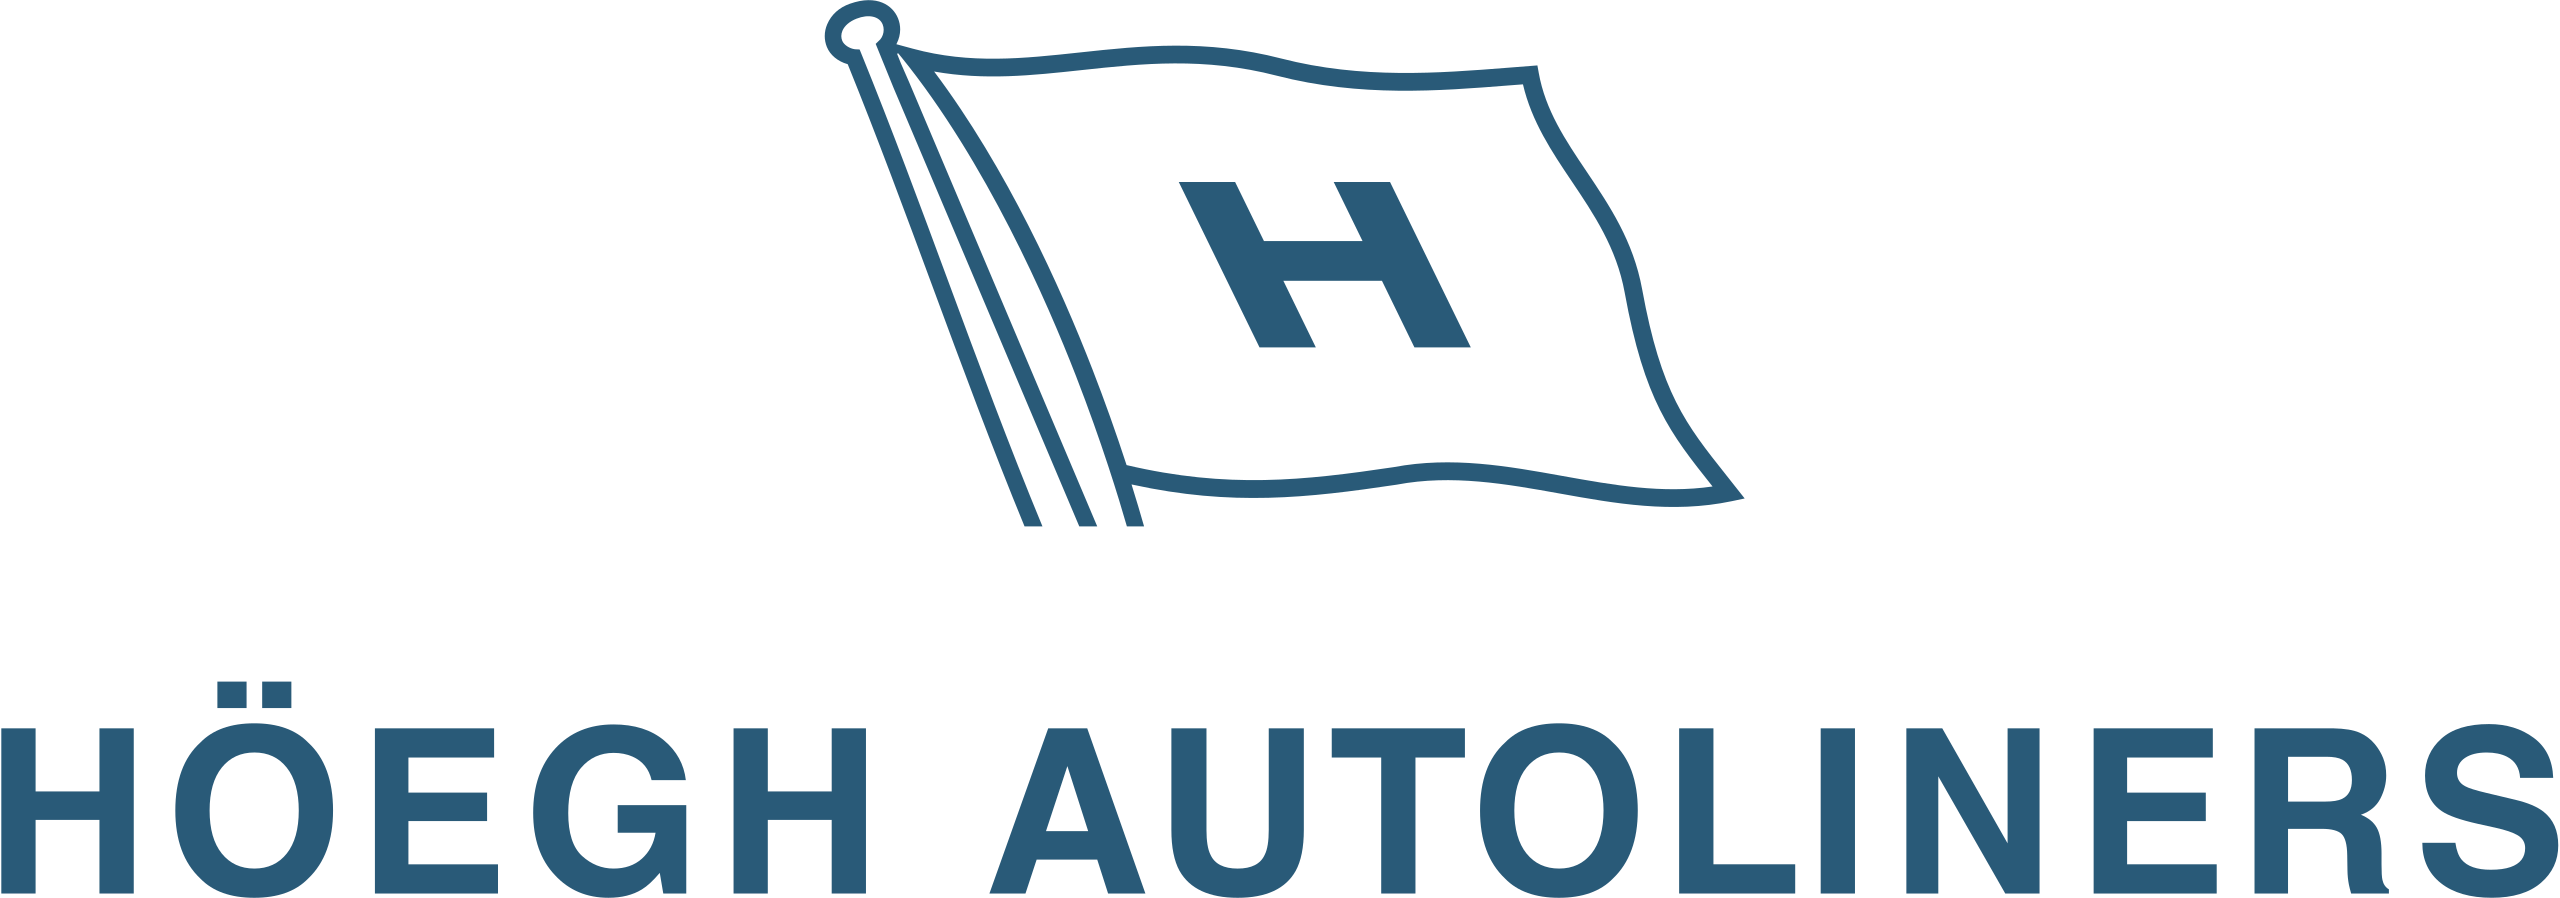 Join the Future of Shipping: Hoegh Autoliners Seeks Head of Digital Strategy!